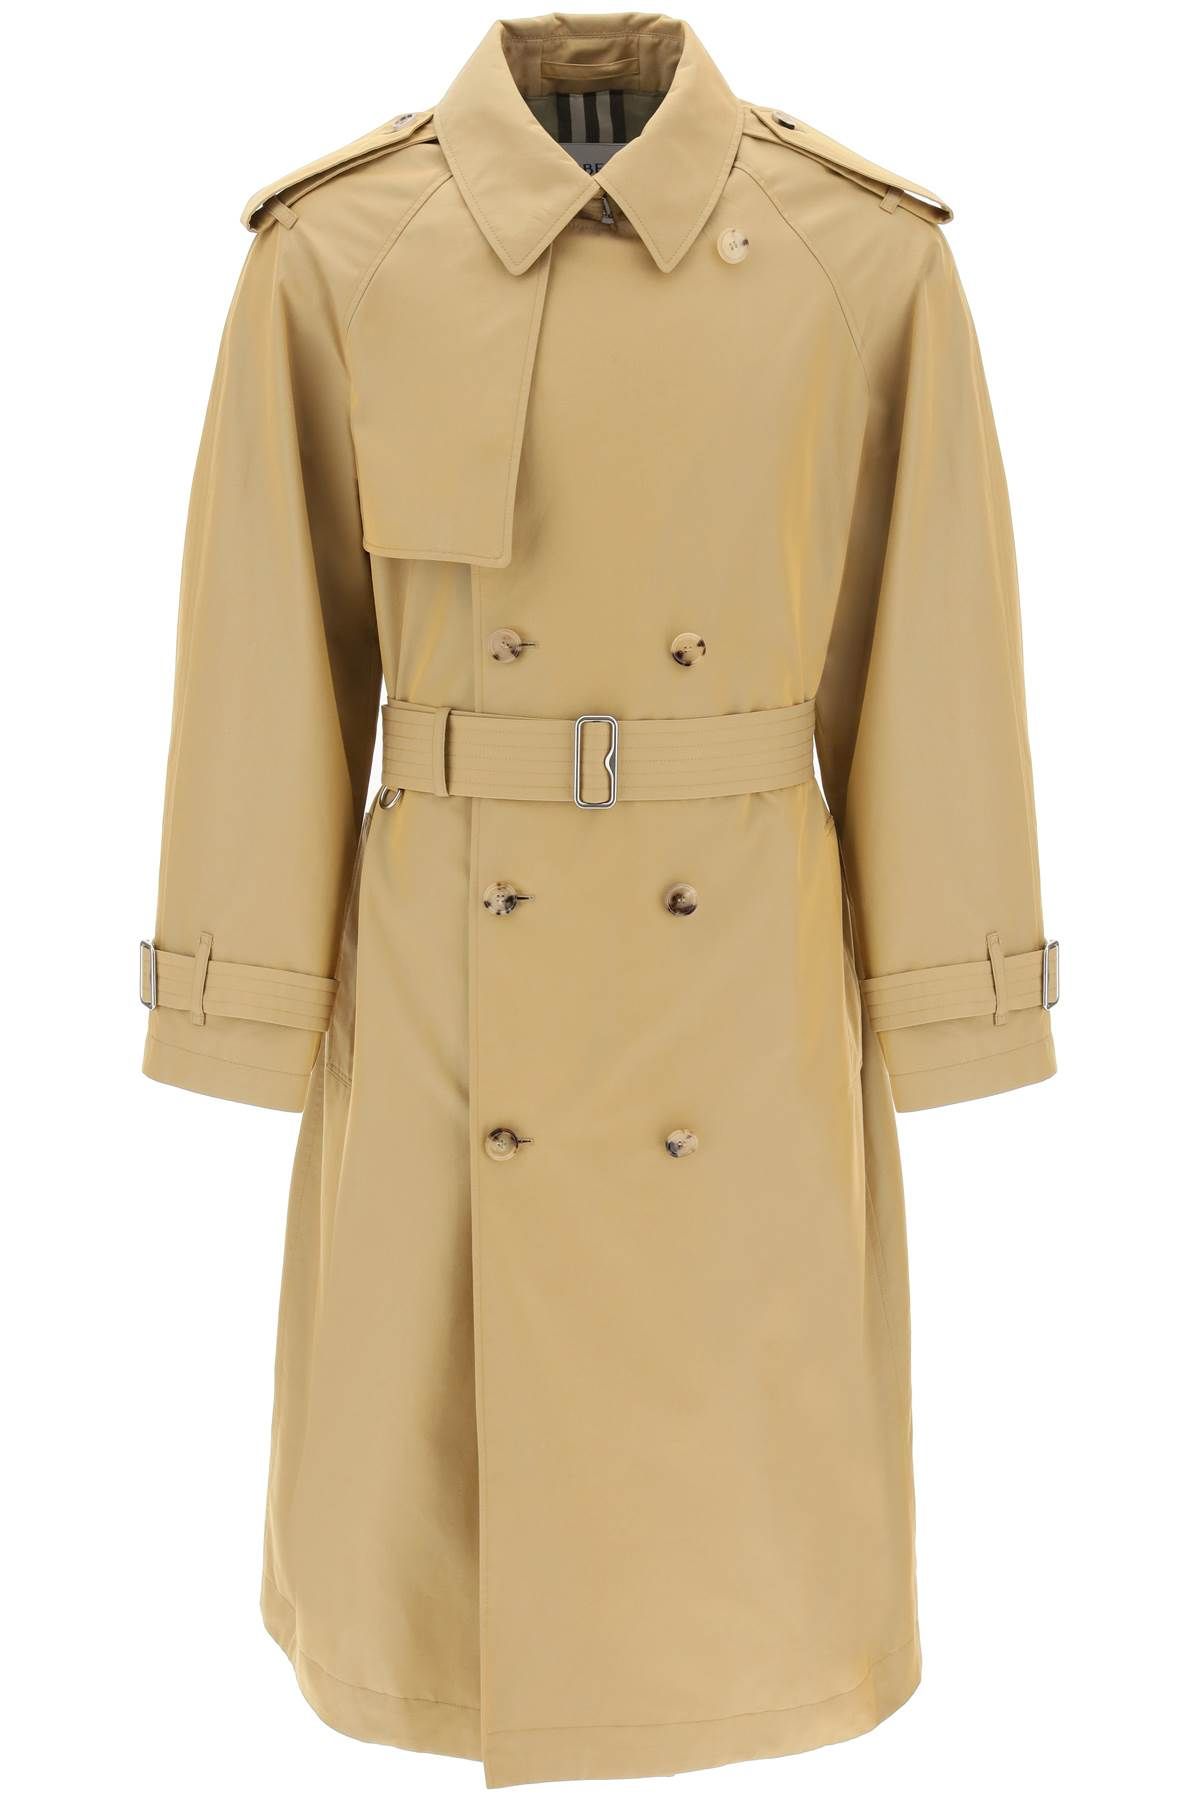 Burberry BURBERRY long iridescent trench